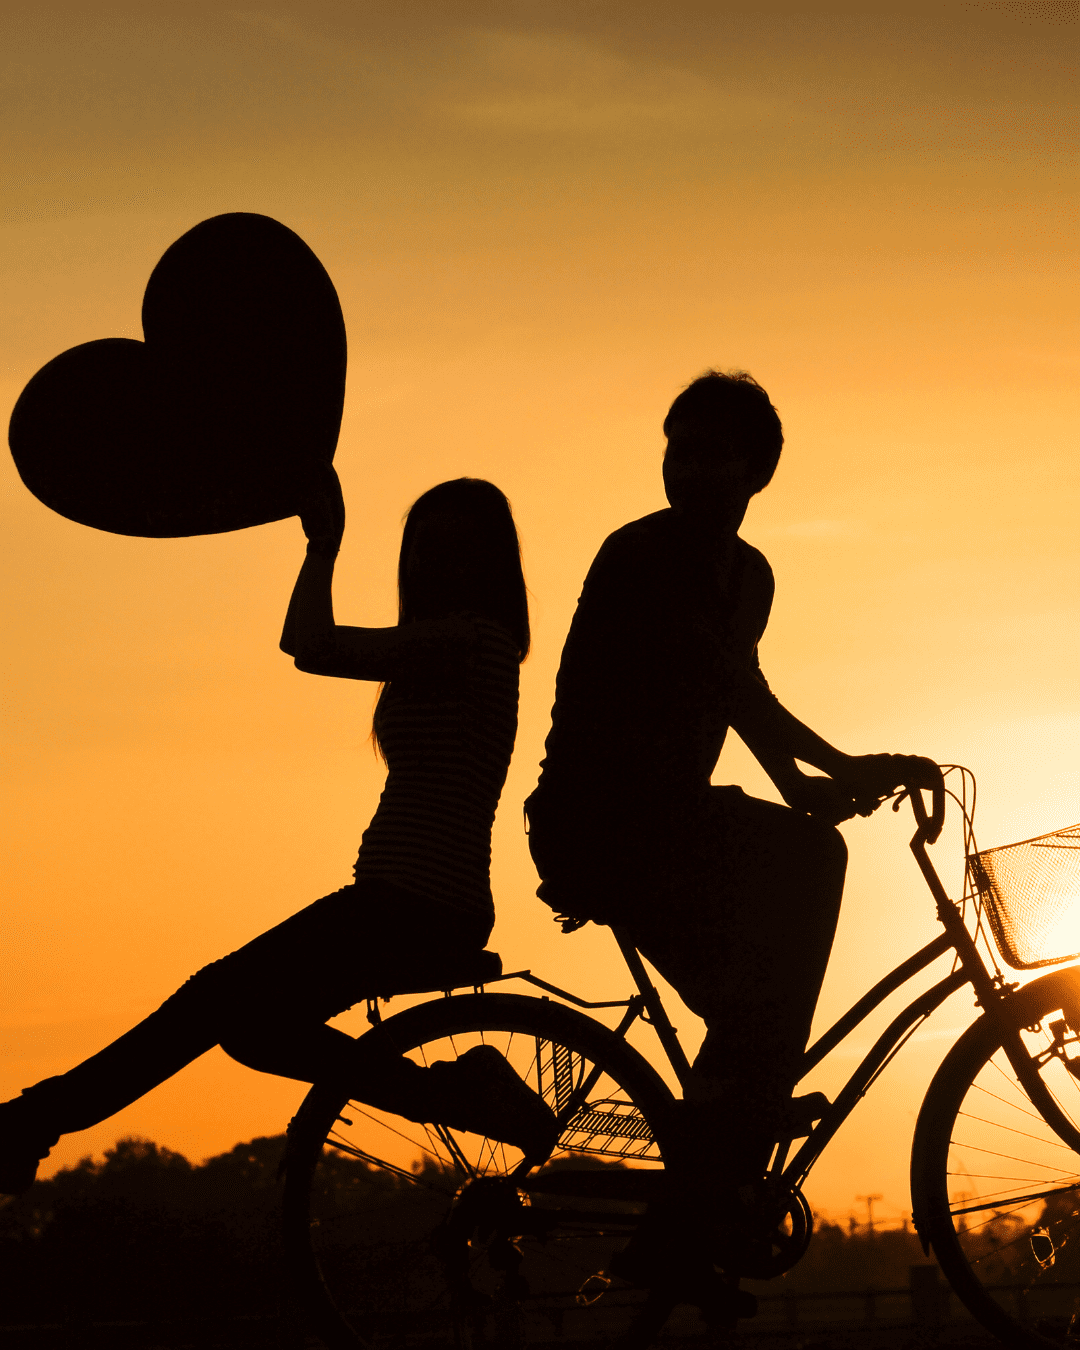 A blissful moment: A man and woman riding a tandem bike together against a breathtaking sunset backdrop, embracing the joy of shared adventures and love.